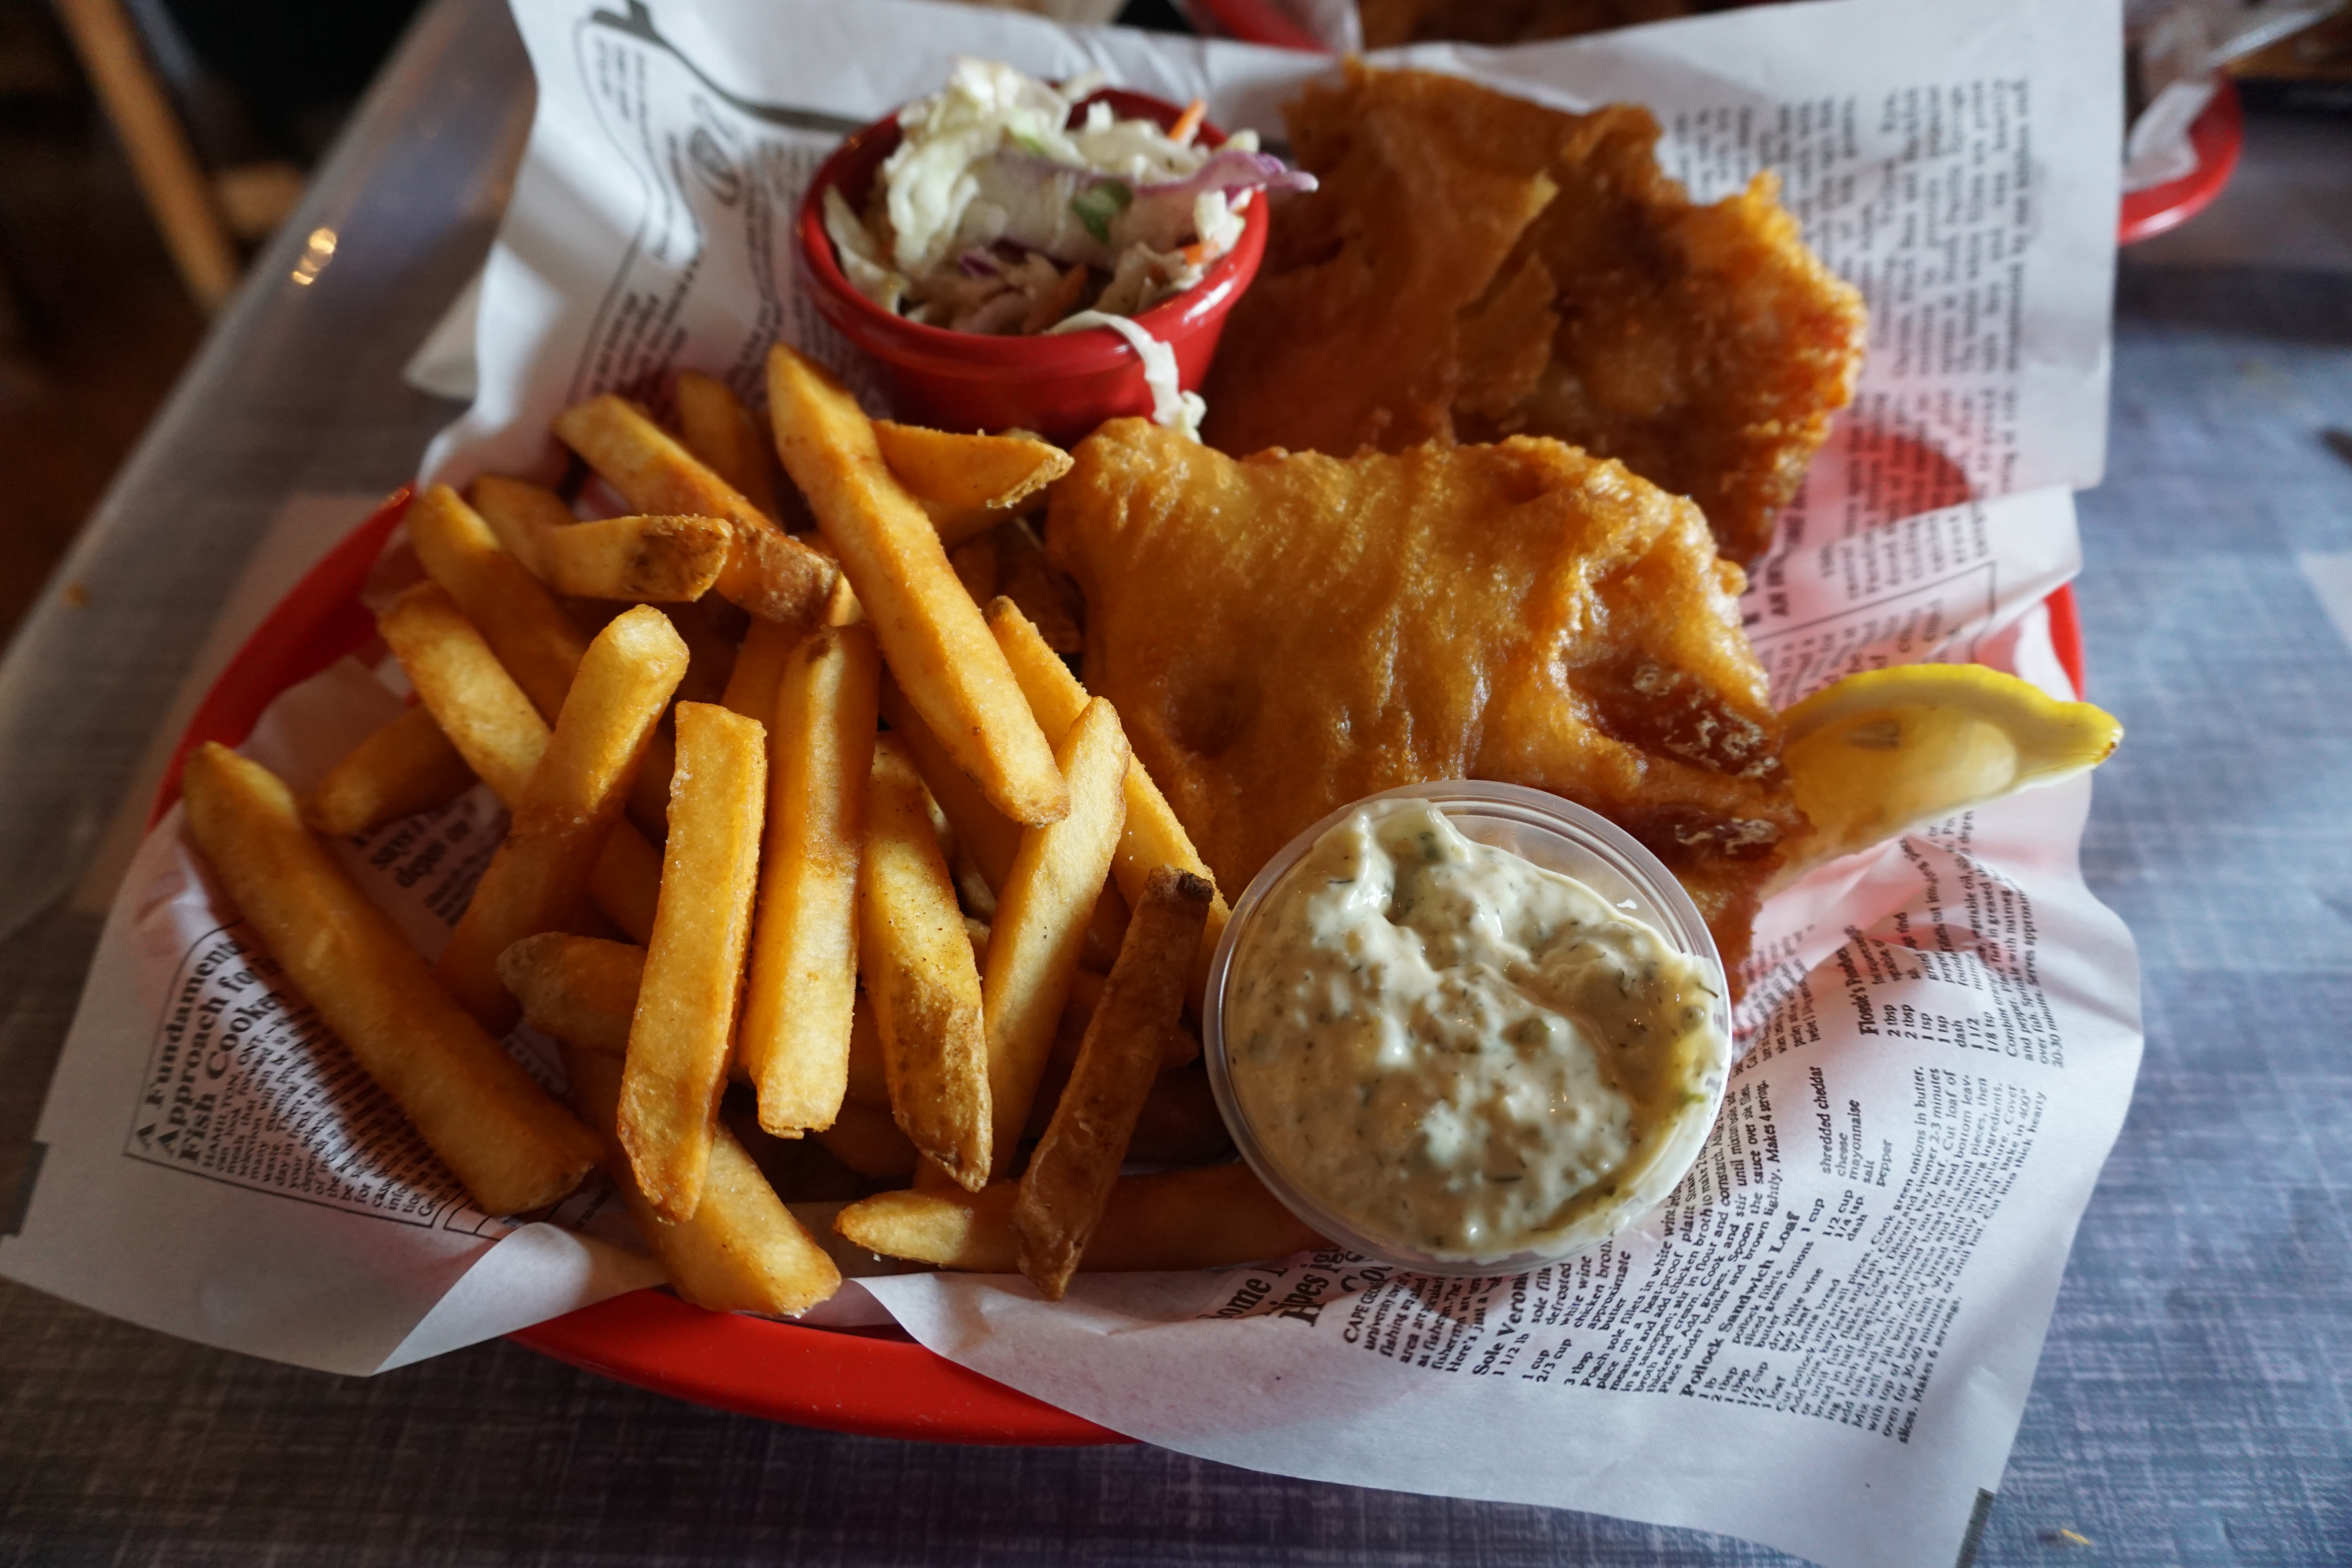 an order of fish and chips with coleslaw and tartar sauce.